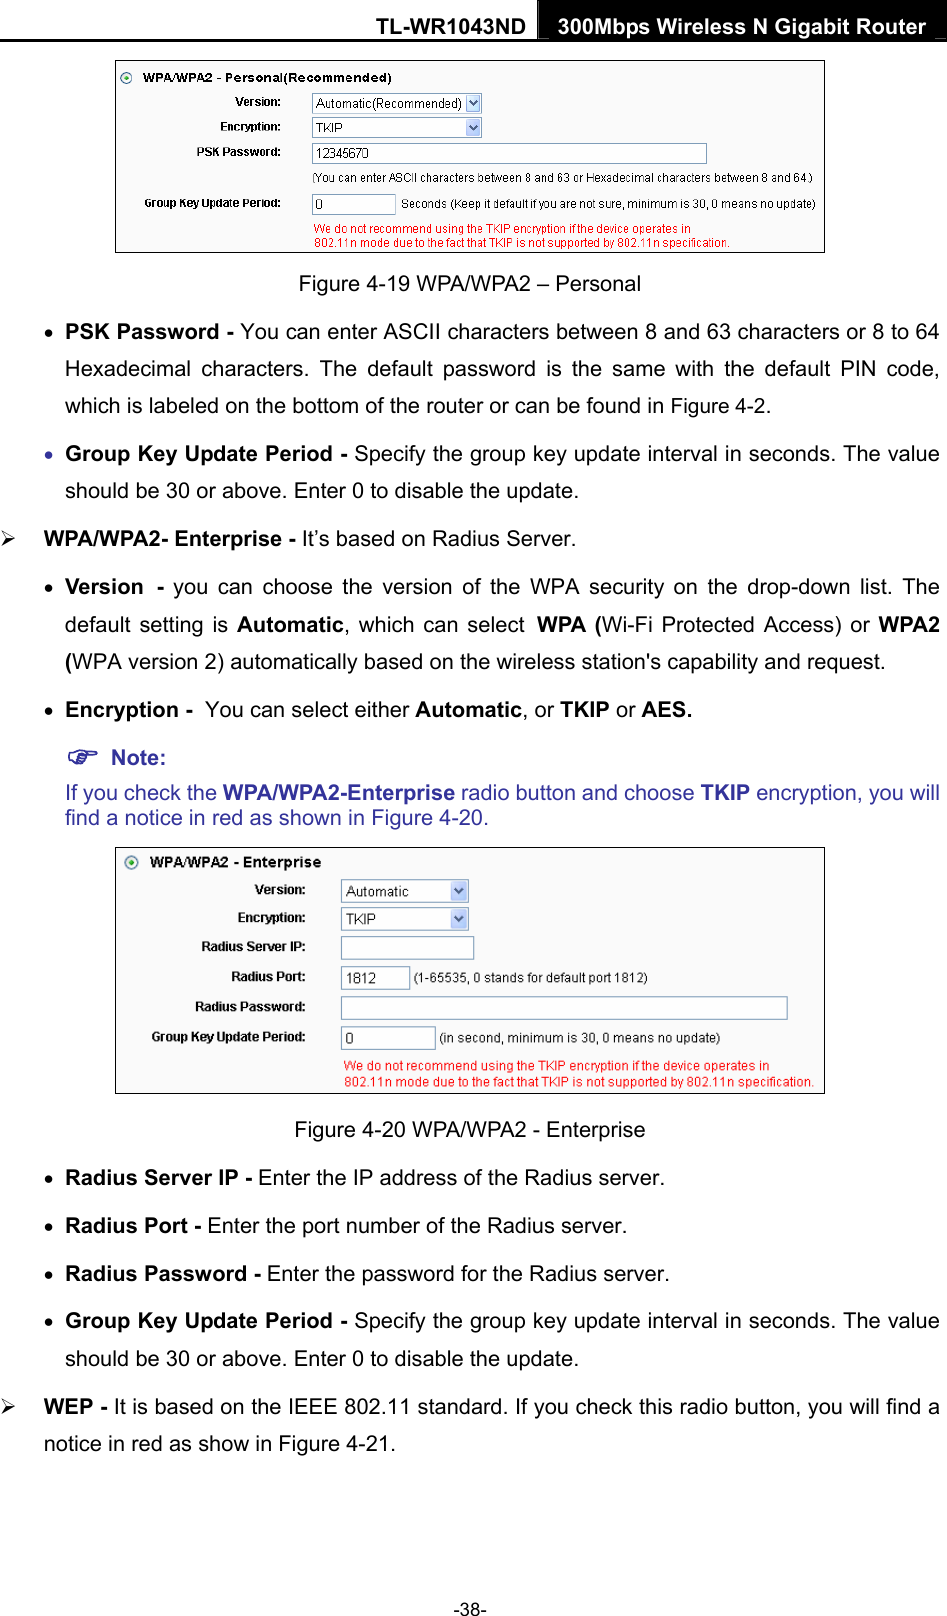 TL-WR1043ND 300Mbps Wireless N Gigabit Router   Figure 4-19 WPA/WPA2 – Personal • PSK Password - You can enter ASCII characters between 8 and 63 characters or 8 to 64 Hexadecimal characters. The default password is the same with the default PIN code, which is labeled on the bottom of the router or can be found in Figure 4-2. • Group Key Update Period - Specify the group key update interval in seconds. The value should be 30 or above. Enter 0 to disable the update. ¾ WPA/WPA2- Enterprise - It’s based on Radius Server. • Version - you can choose the version of the WPA security on the drop-down list. The default setting is Automatic, which can select WPA (Wi-Fi Protected Access) or WPA2 (WPA version 2) automatically based on the wireless station&apos;s capability and request. • Encryption - You can select either Automatic, or TKIP or AES. ) Note: If you check the WPA/WPA2-Enterprise radio button and choose TKIP encryption, you will find a notice in red as shown in Figure 4-20.  Figure 4-20 WPA/WPA2 - Enterprise • Radius Server IP - Enter the IP address of the Radius server. • Radius Port - Enter the port number of the Radius server. • Radius Password - Enter the password for the Radius server. • Group Key Update Period - Specify the group key update interval in seconds. The value should be 30 or above. Enter 0 to disable the update. ¾ WEP - It is based on the IEEE 802.11 standard. If you check this radio button, you will find a notice in red as show in Figure 4-21.  -38- 